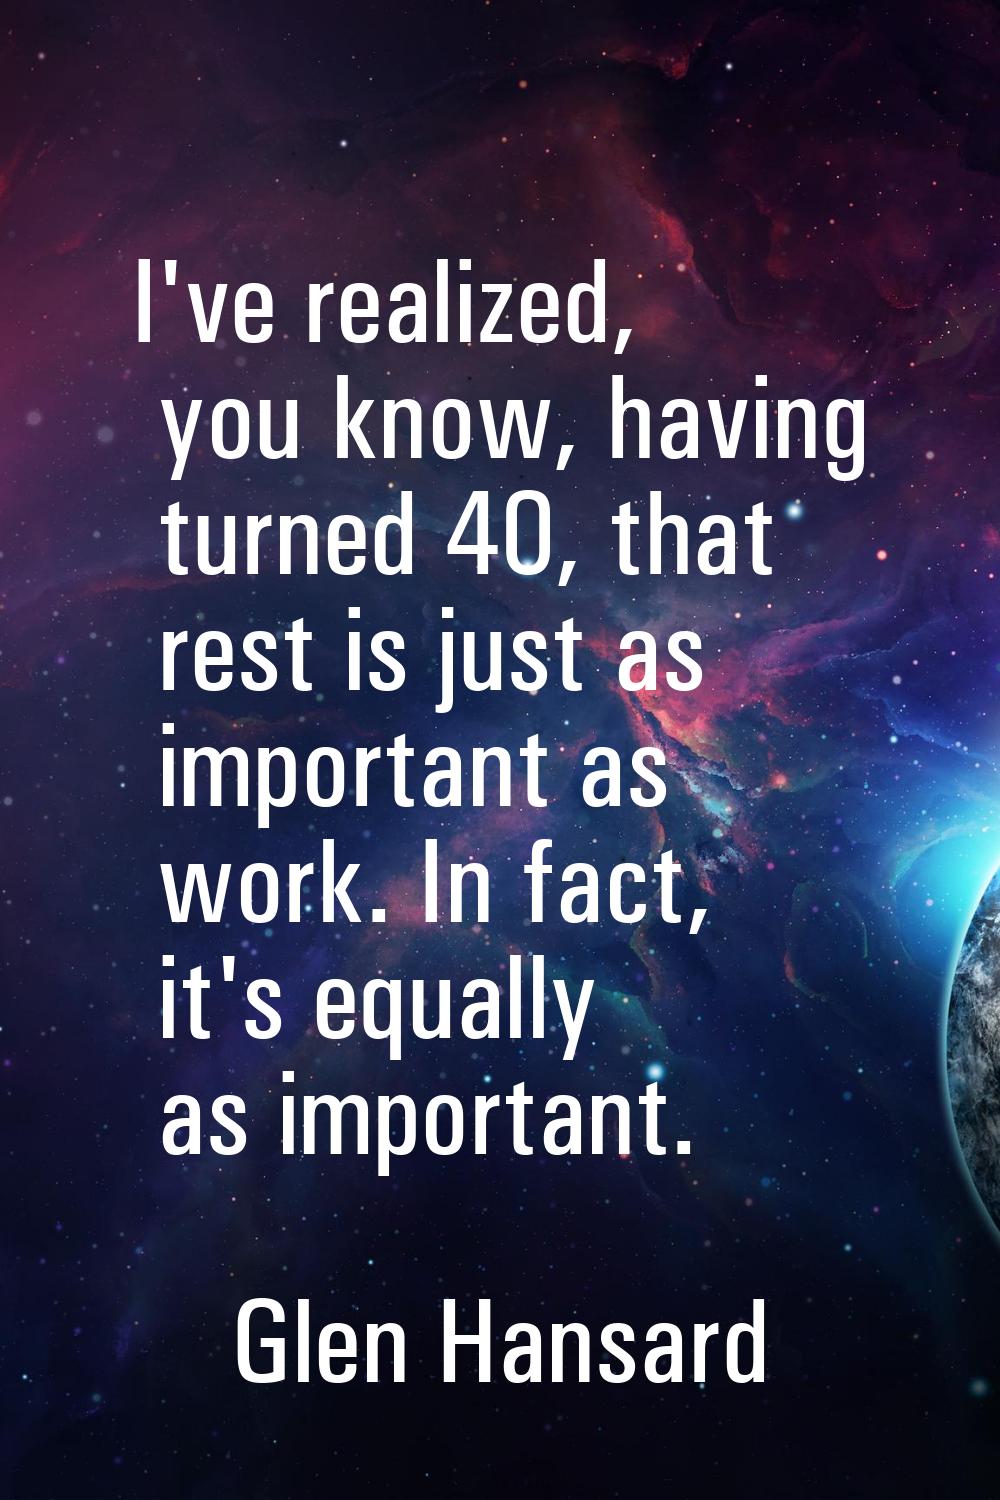 I've realized, you know, having turned 40, that rest is just as important as work. In fact, it's eq